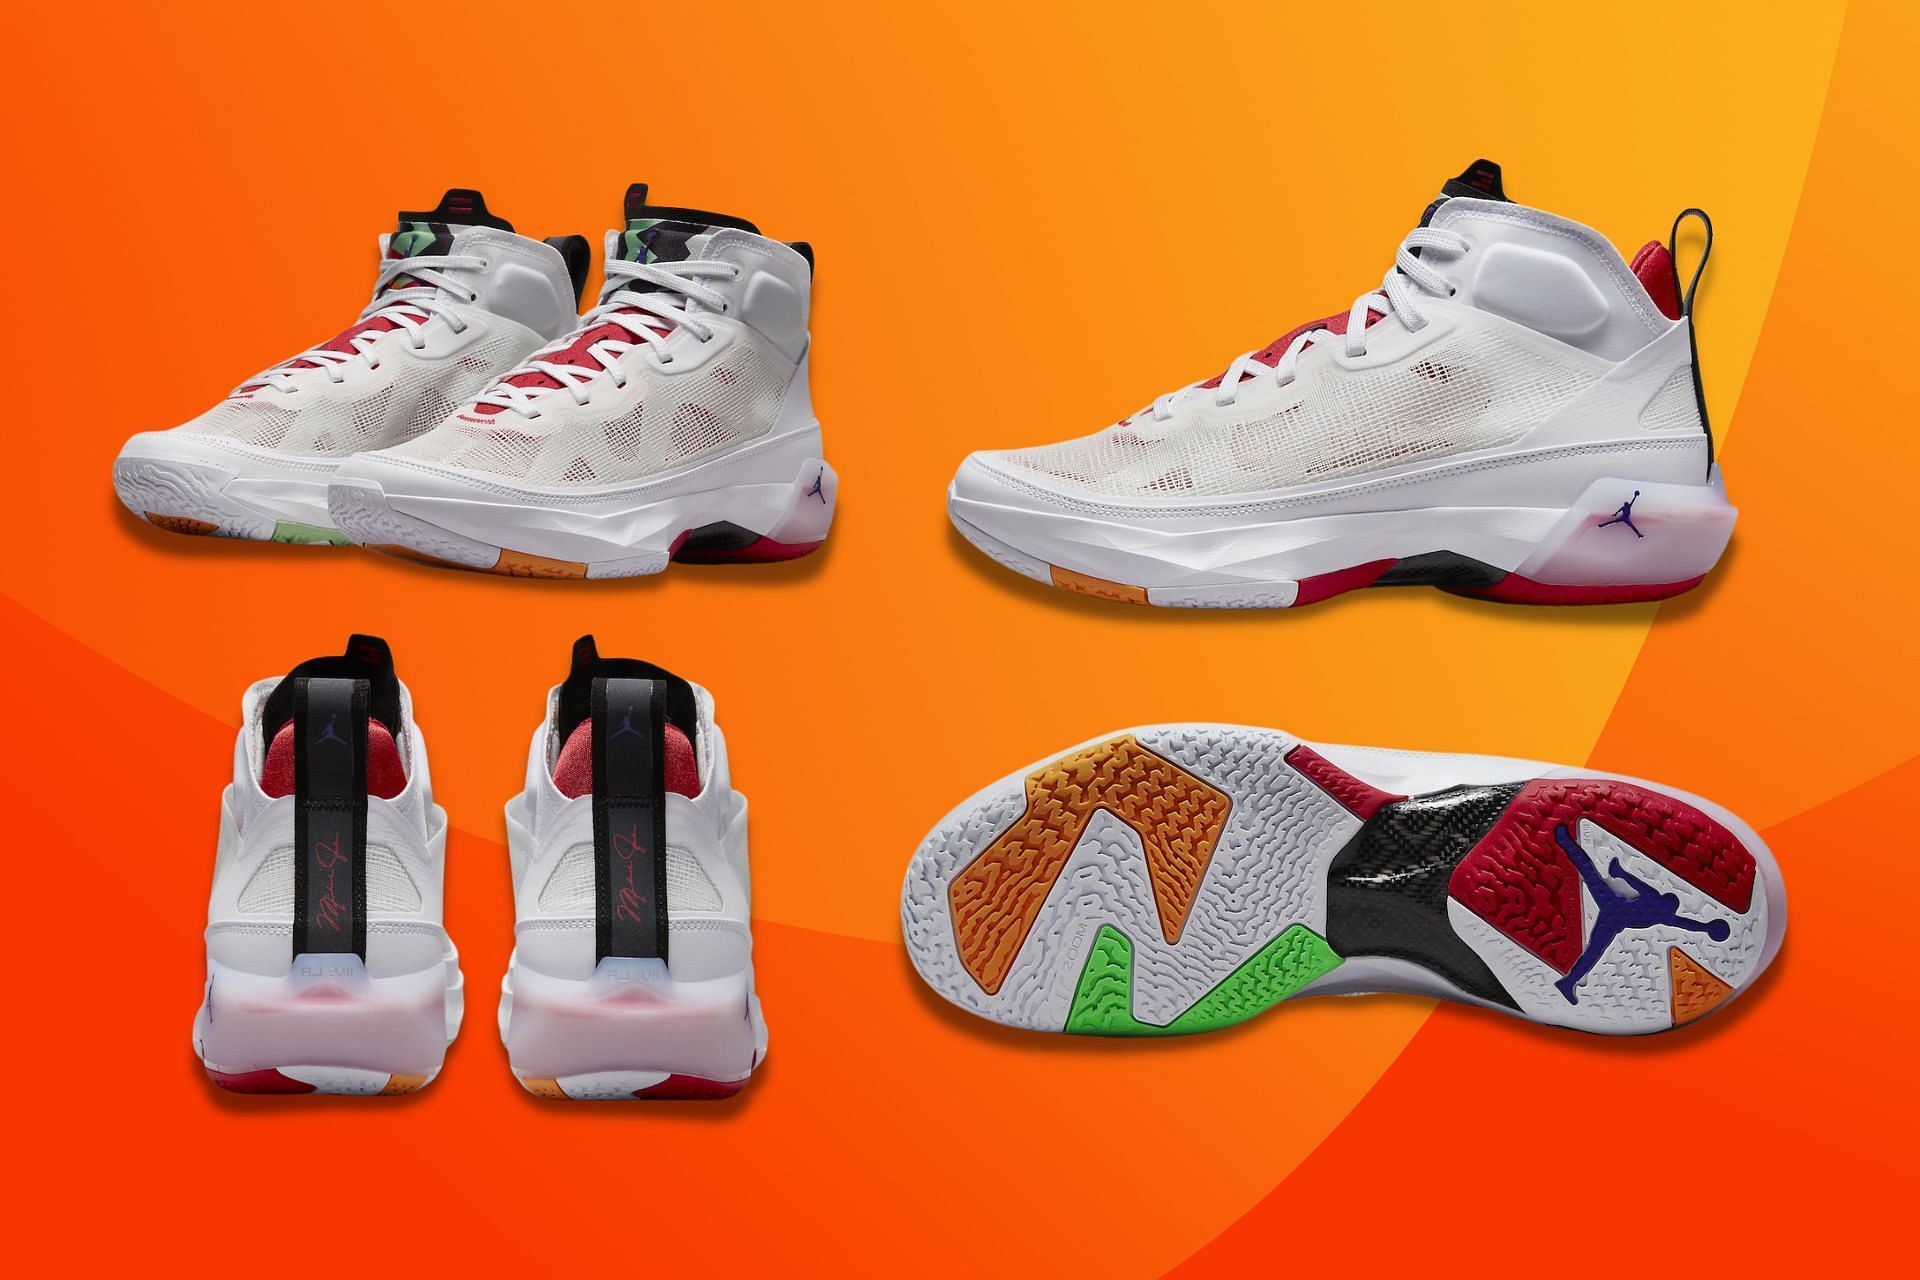 Take a closer look at the upcoming shoes (Image via Sportskeeda)